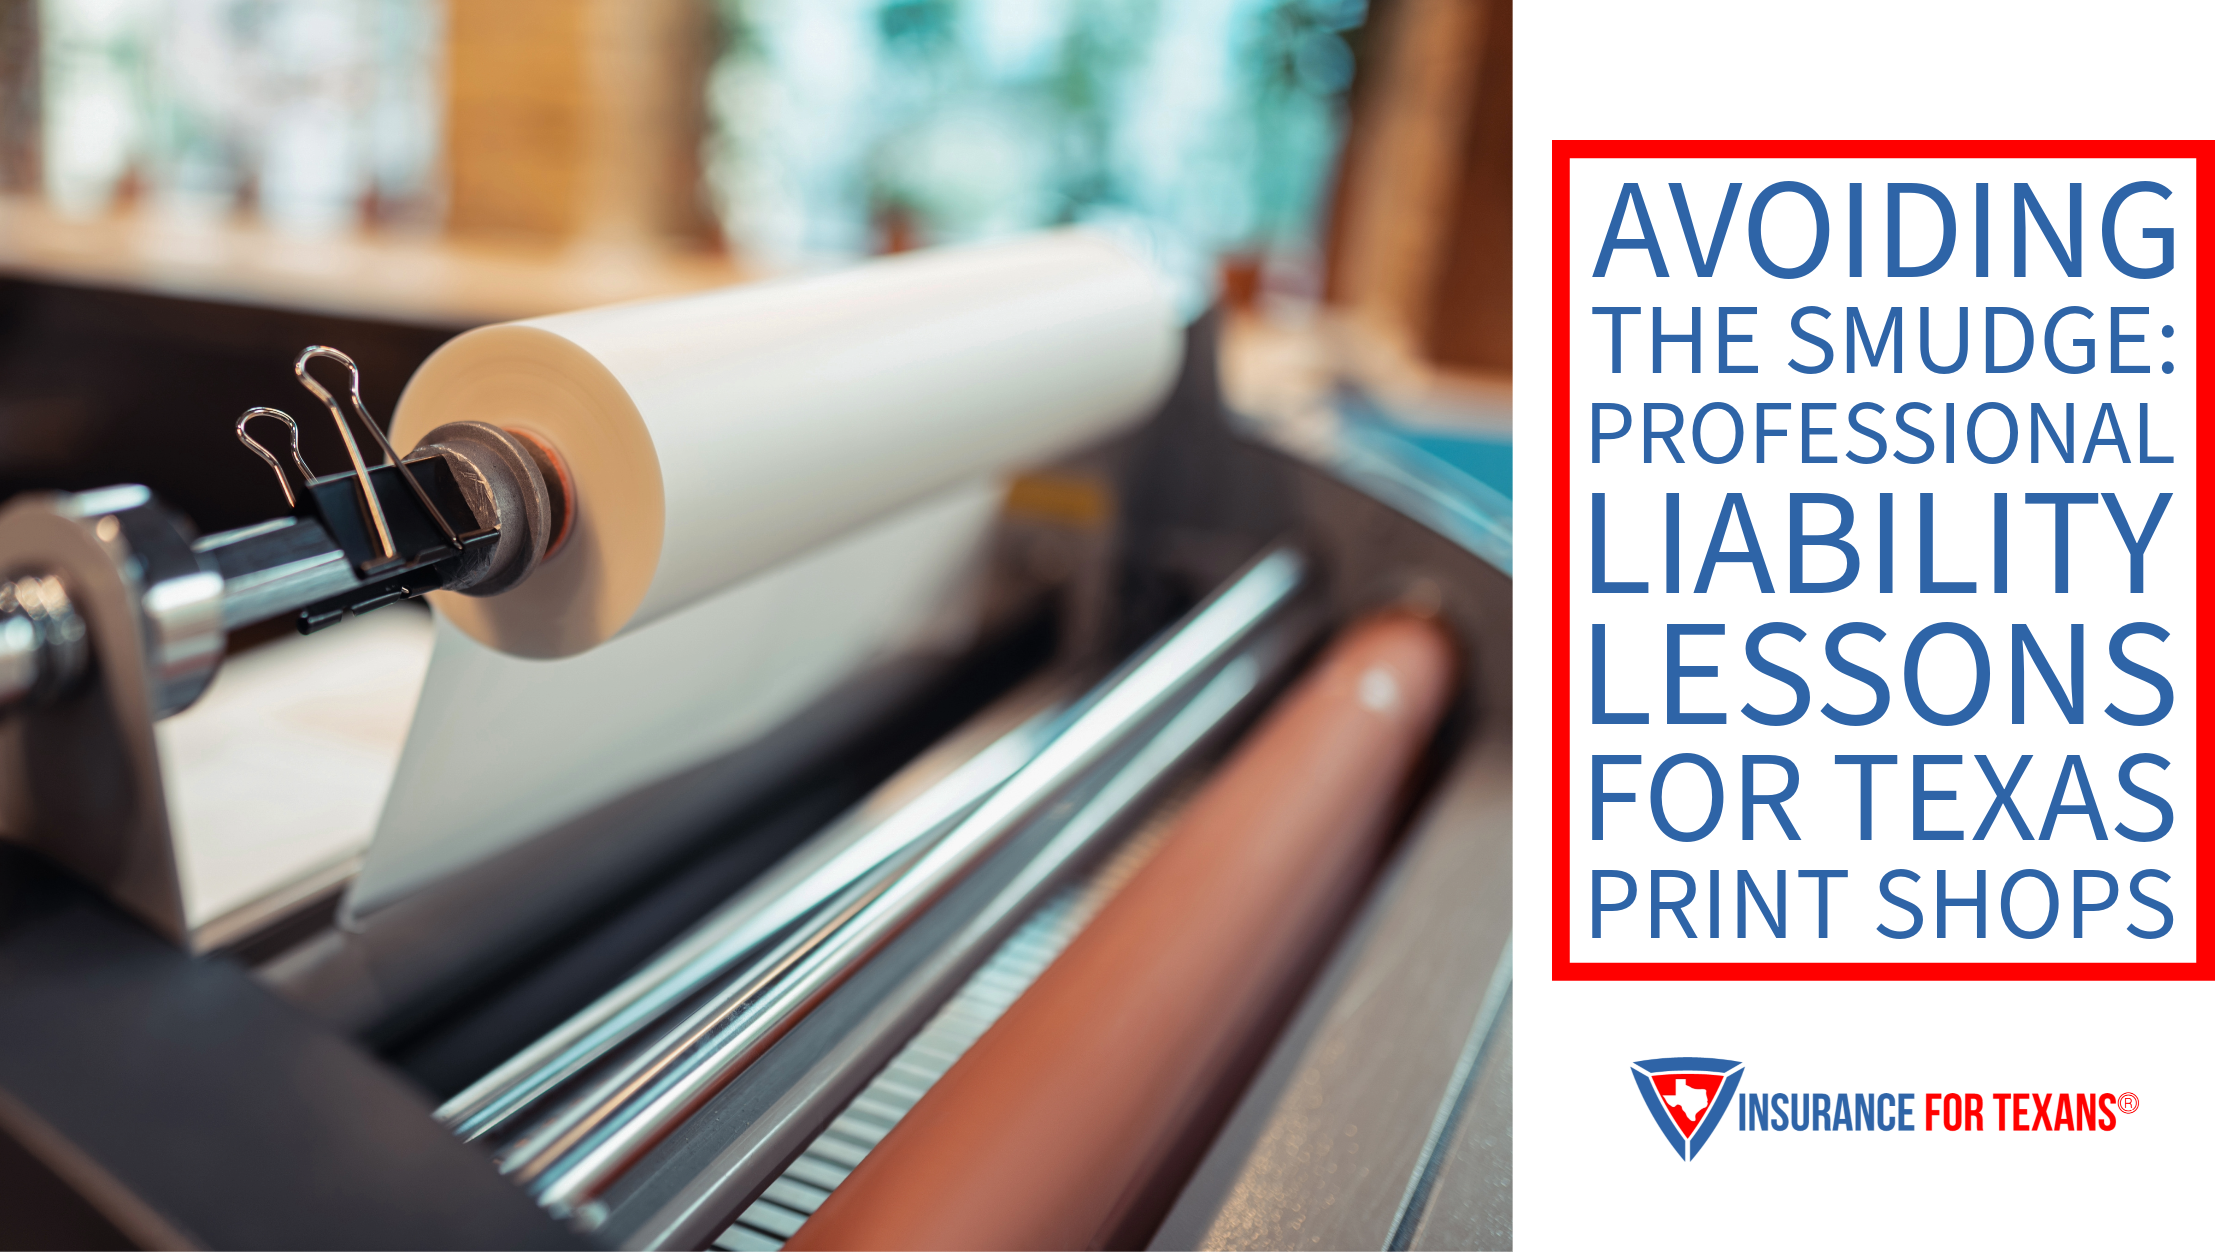 Avoiding The Smudge: Professional Liability Lessons for Texas Print Shops